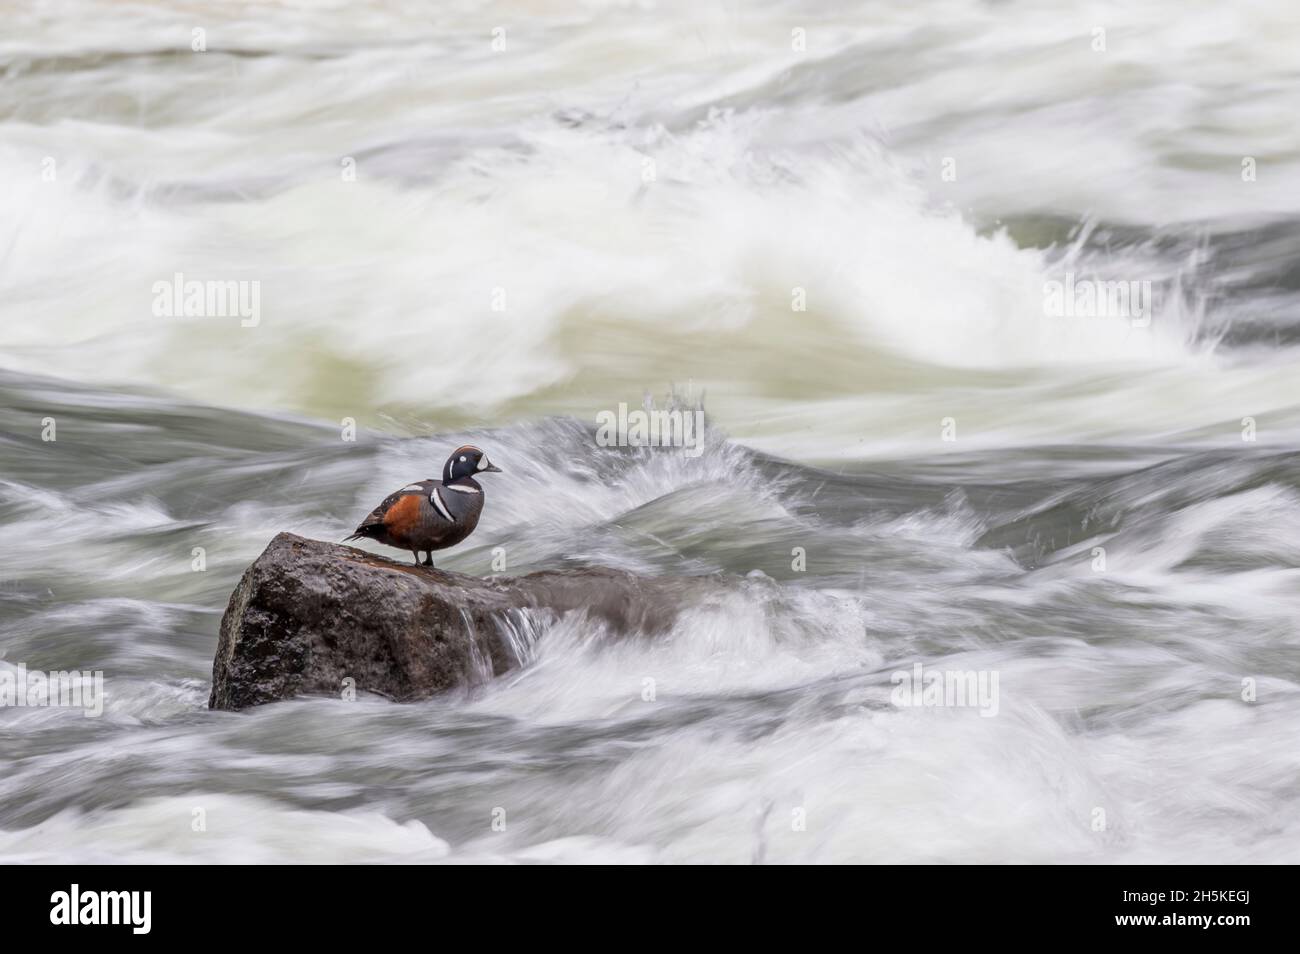 A harlequin duck (Histrionicus histrionicus) perched on a rock surrounded by rushing water; Yellowstone National Park, United States of America Stock Photo